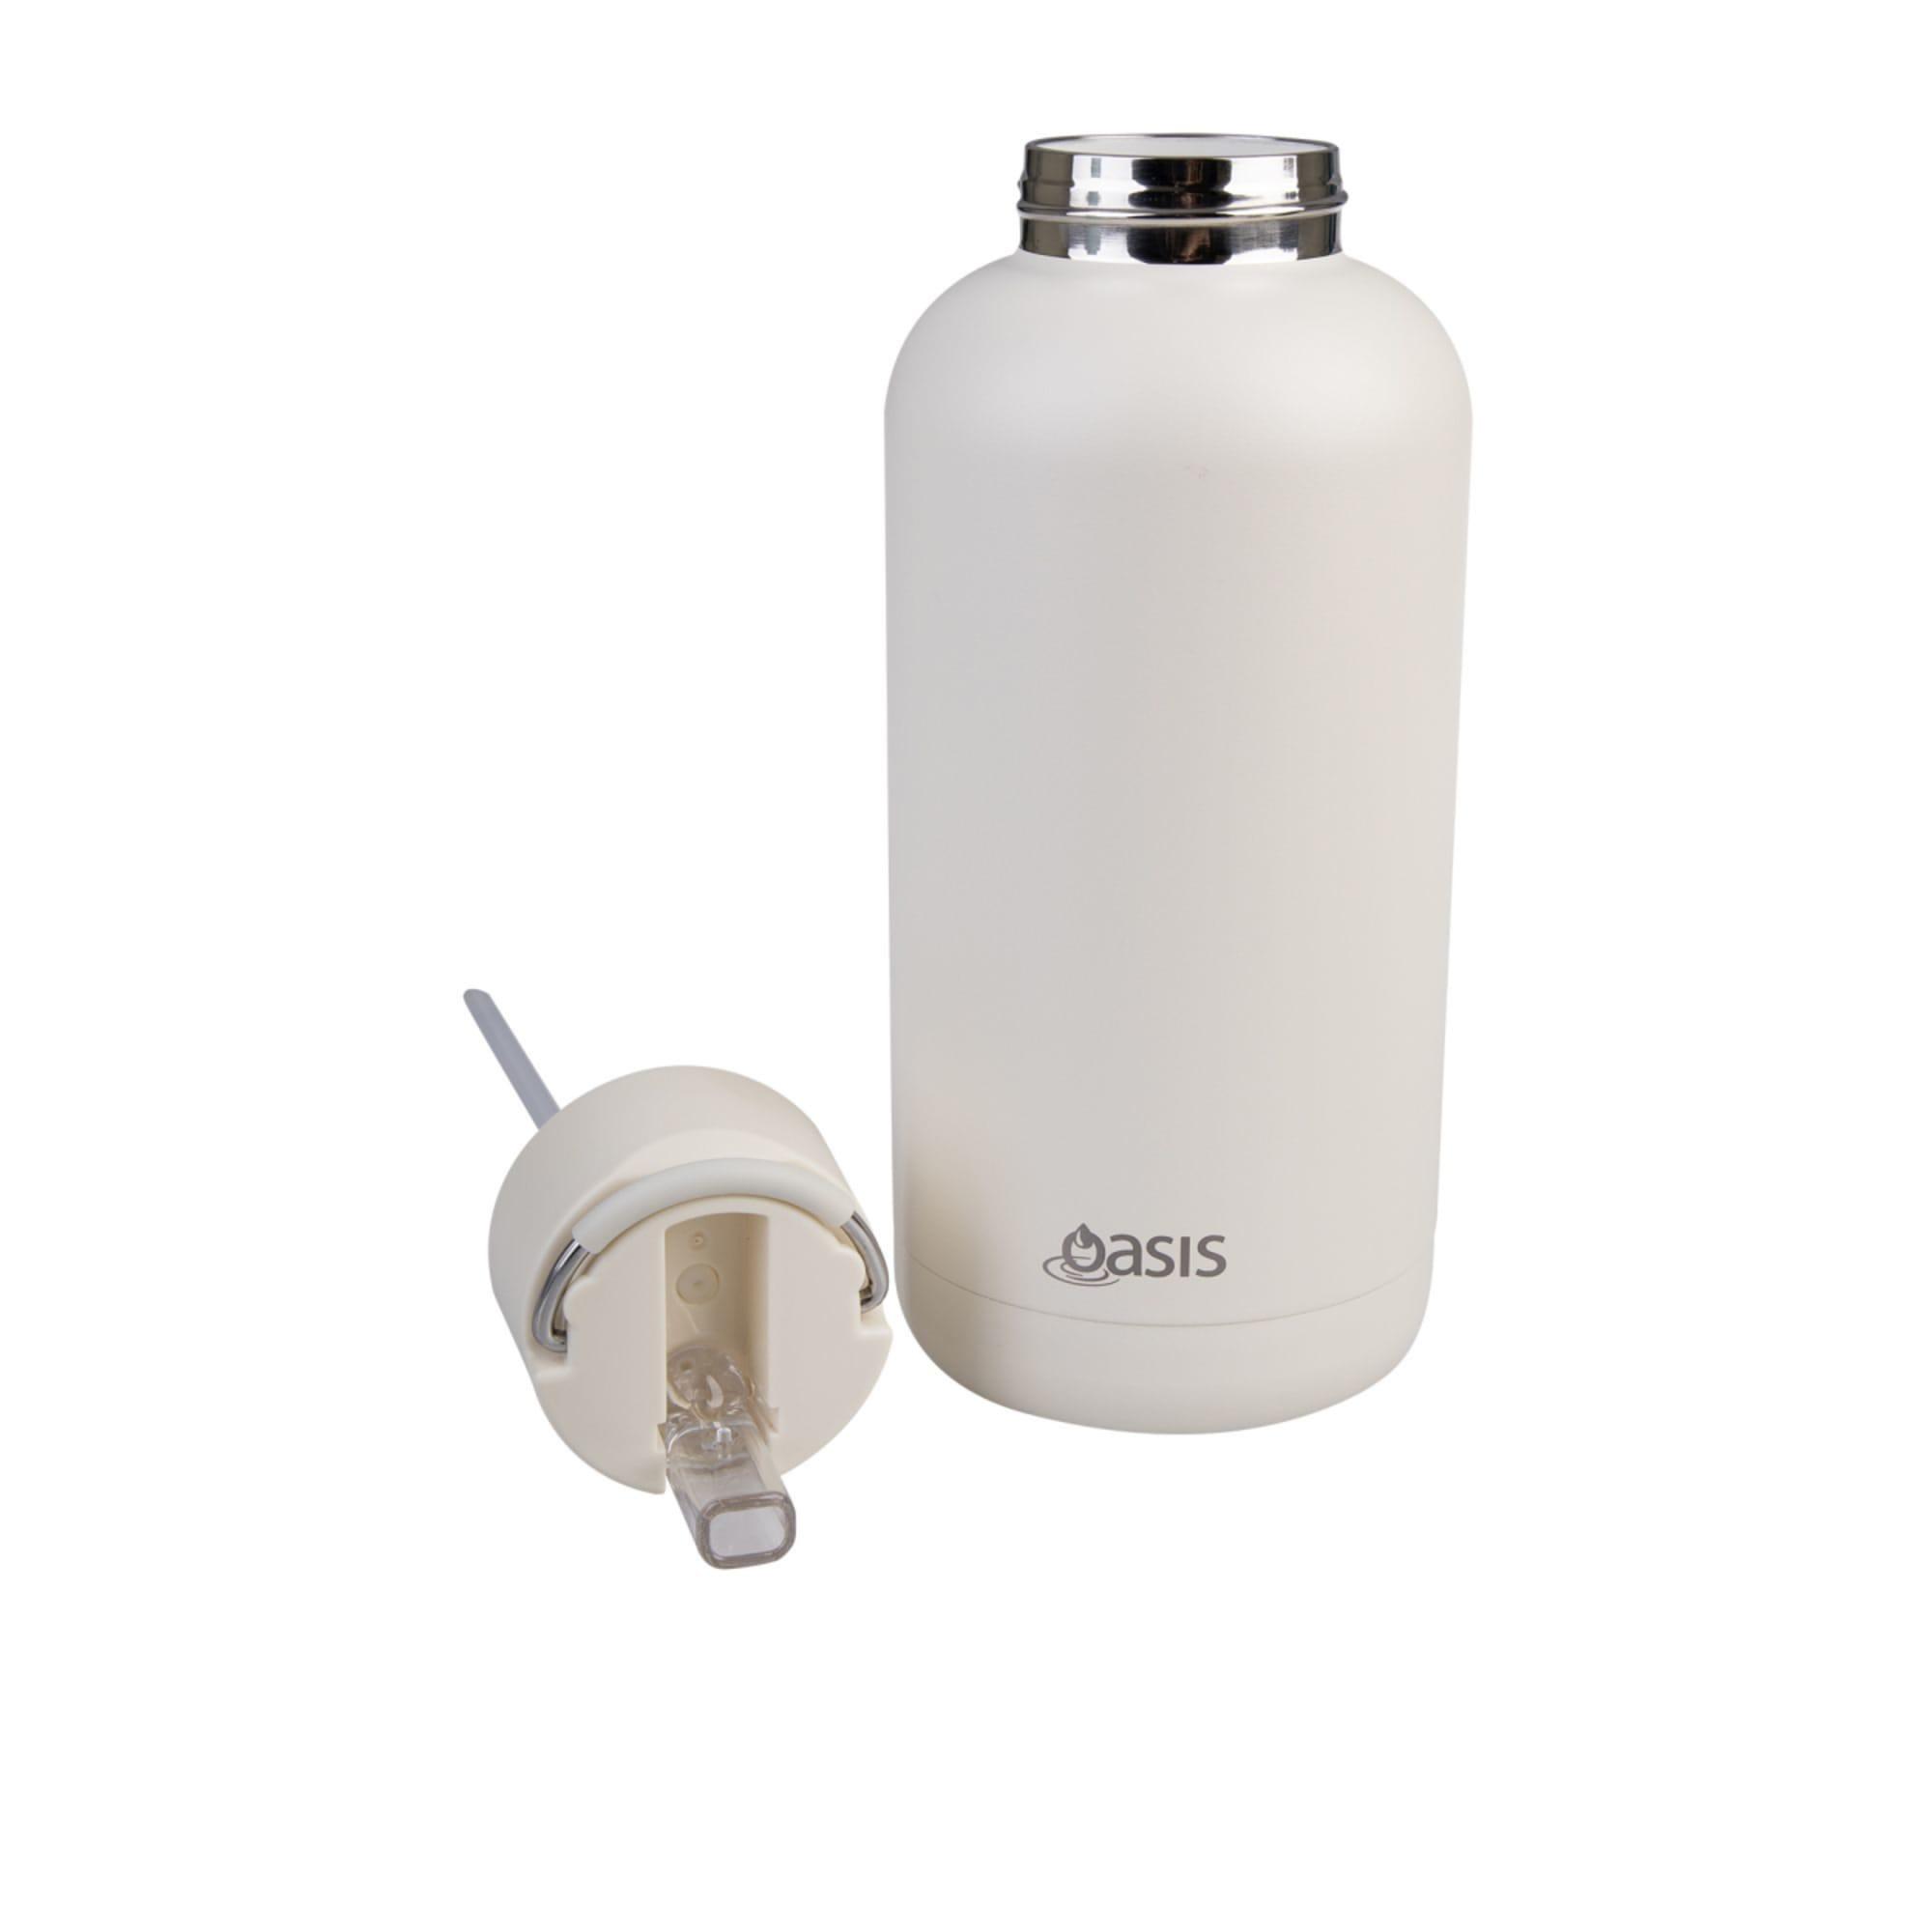 Oasis Moda Triple Wall Insulated Drink Bottle 1.5L Alabaster Image 4